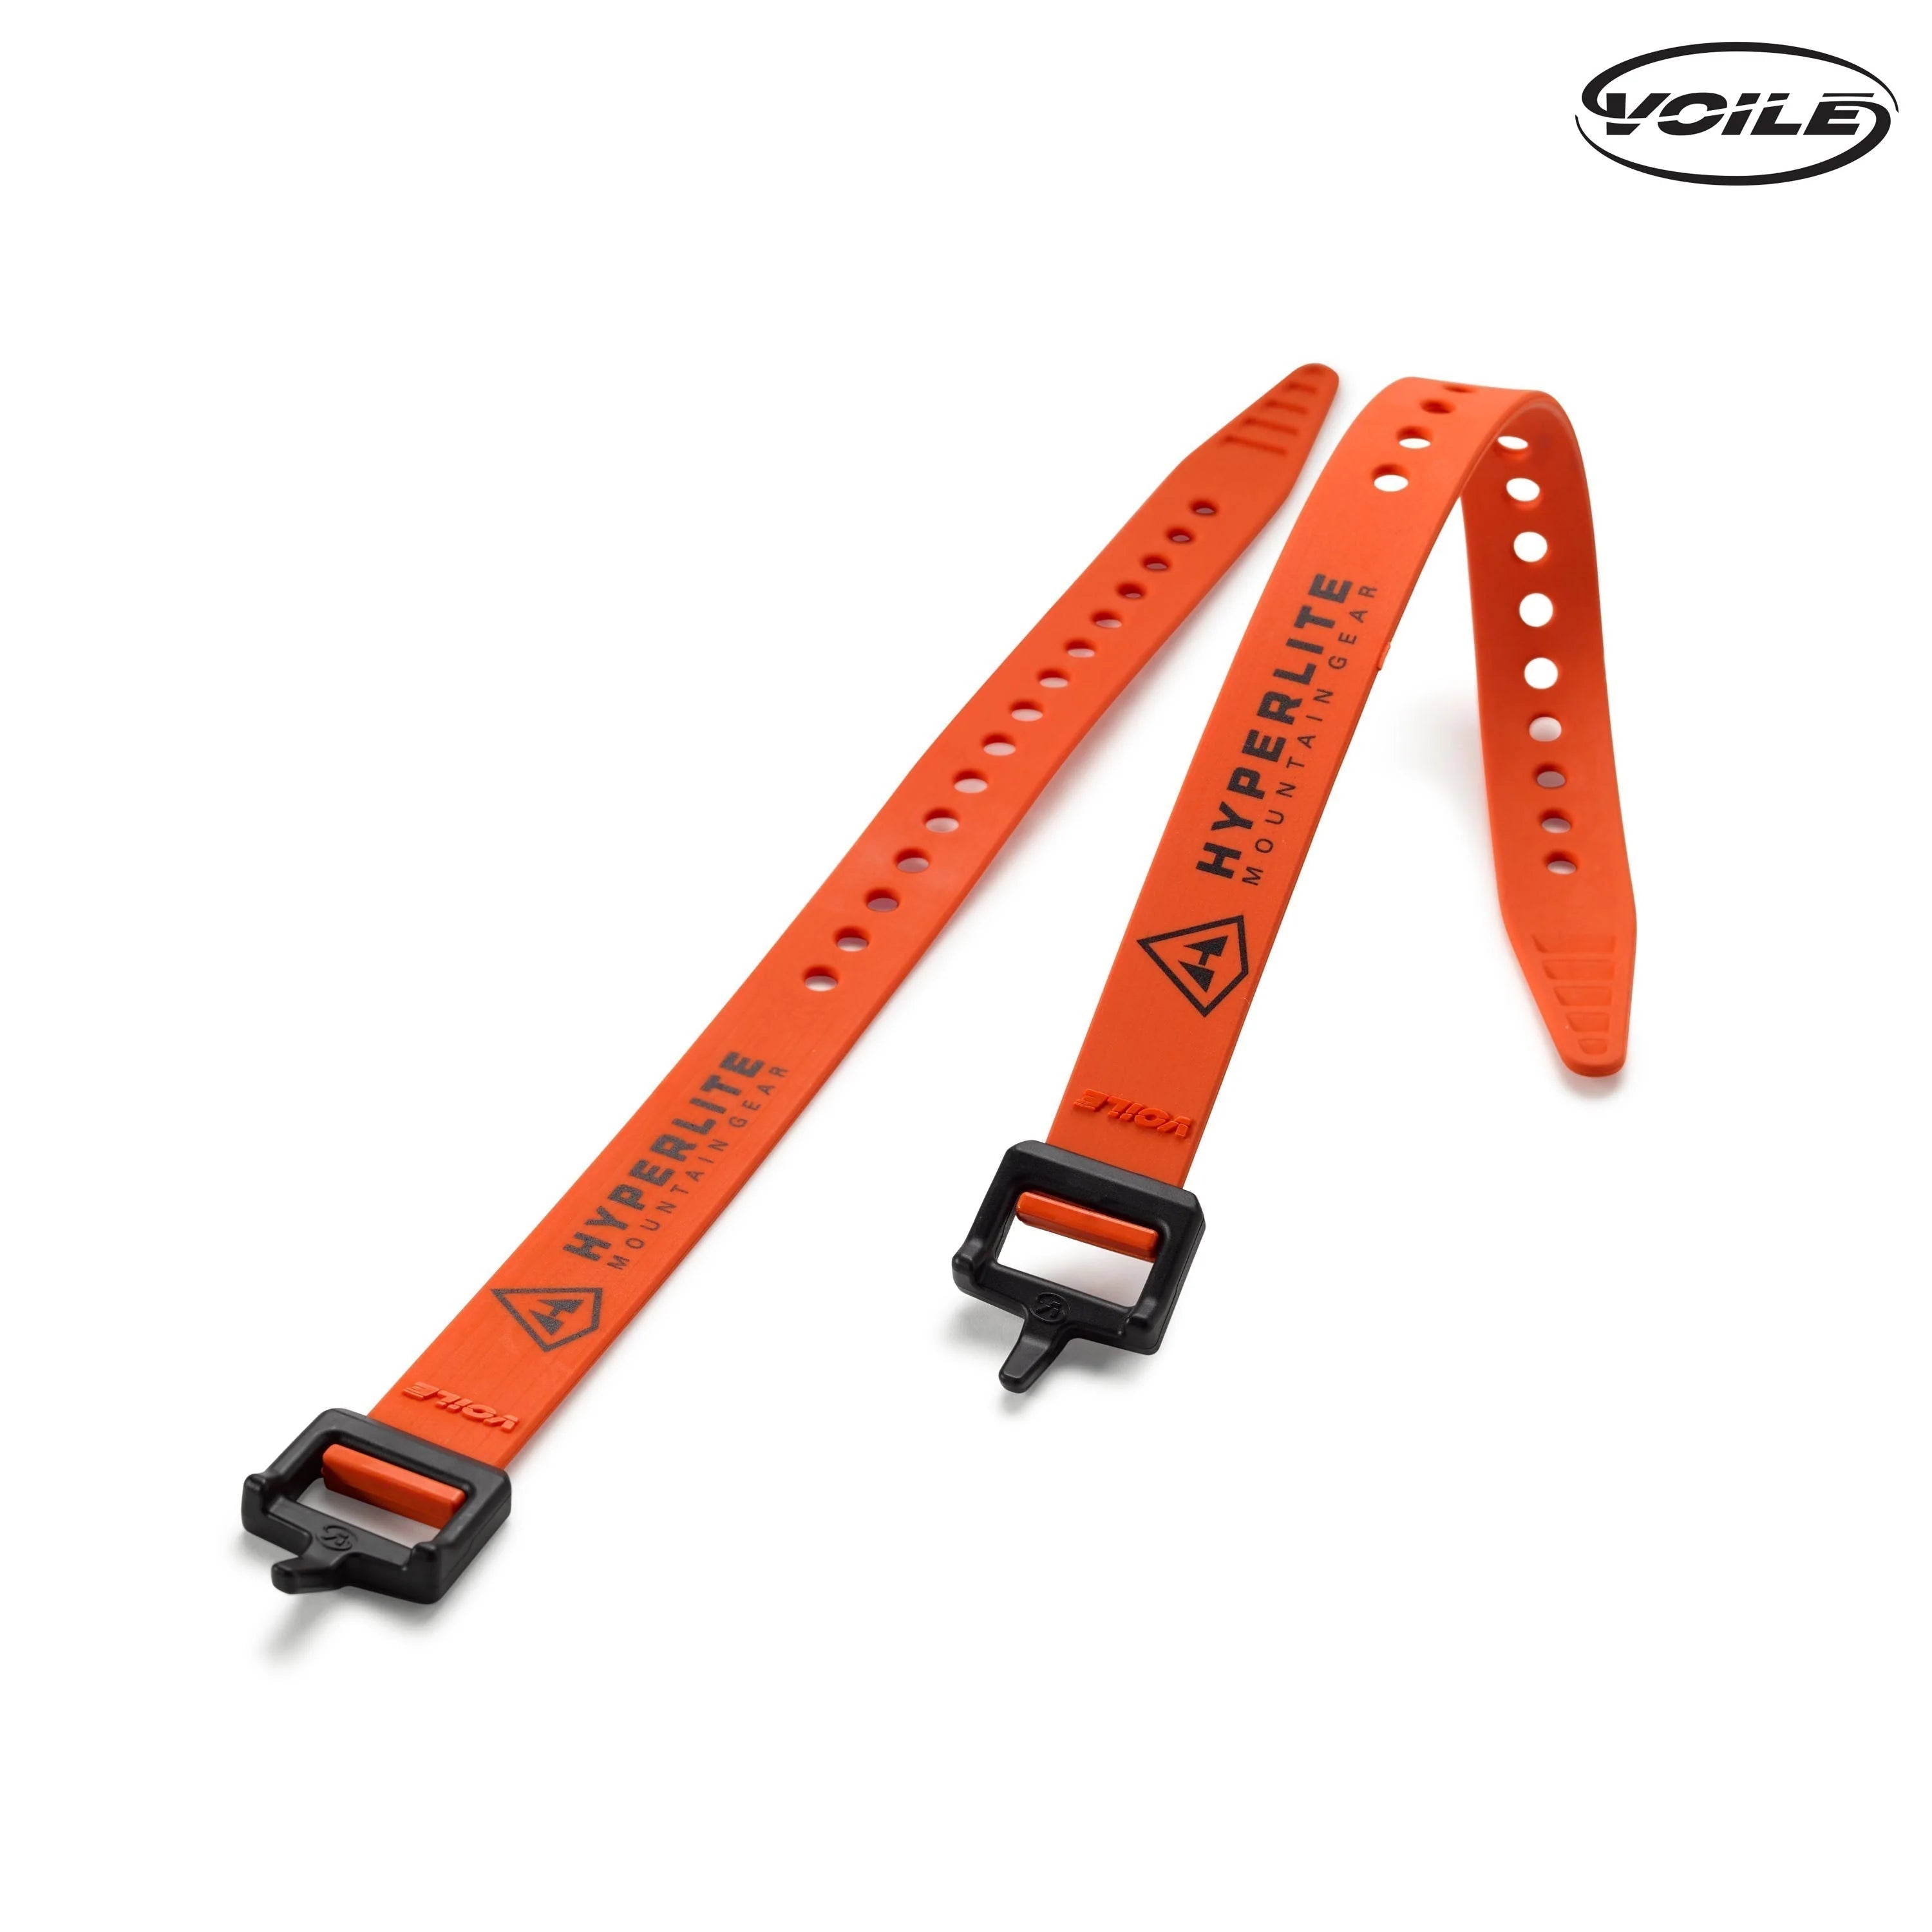 A pair of orange and black straps on a white background.